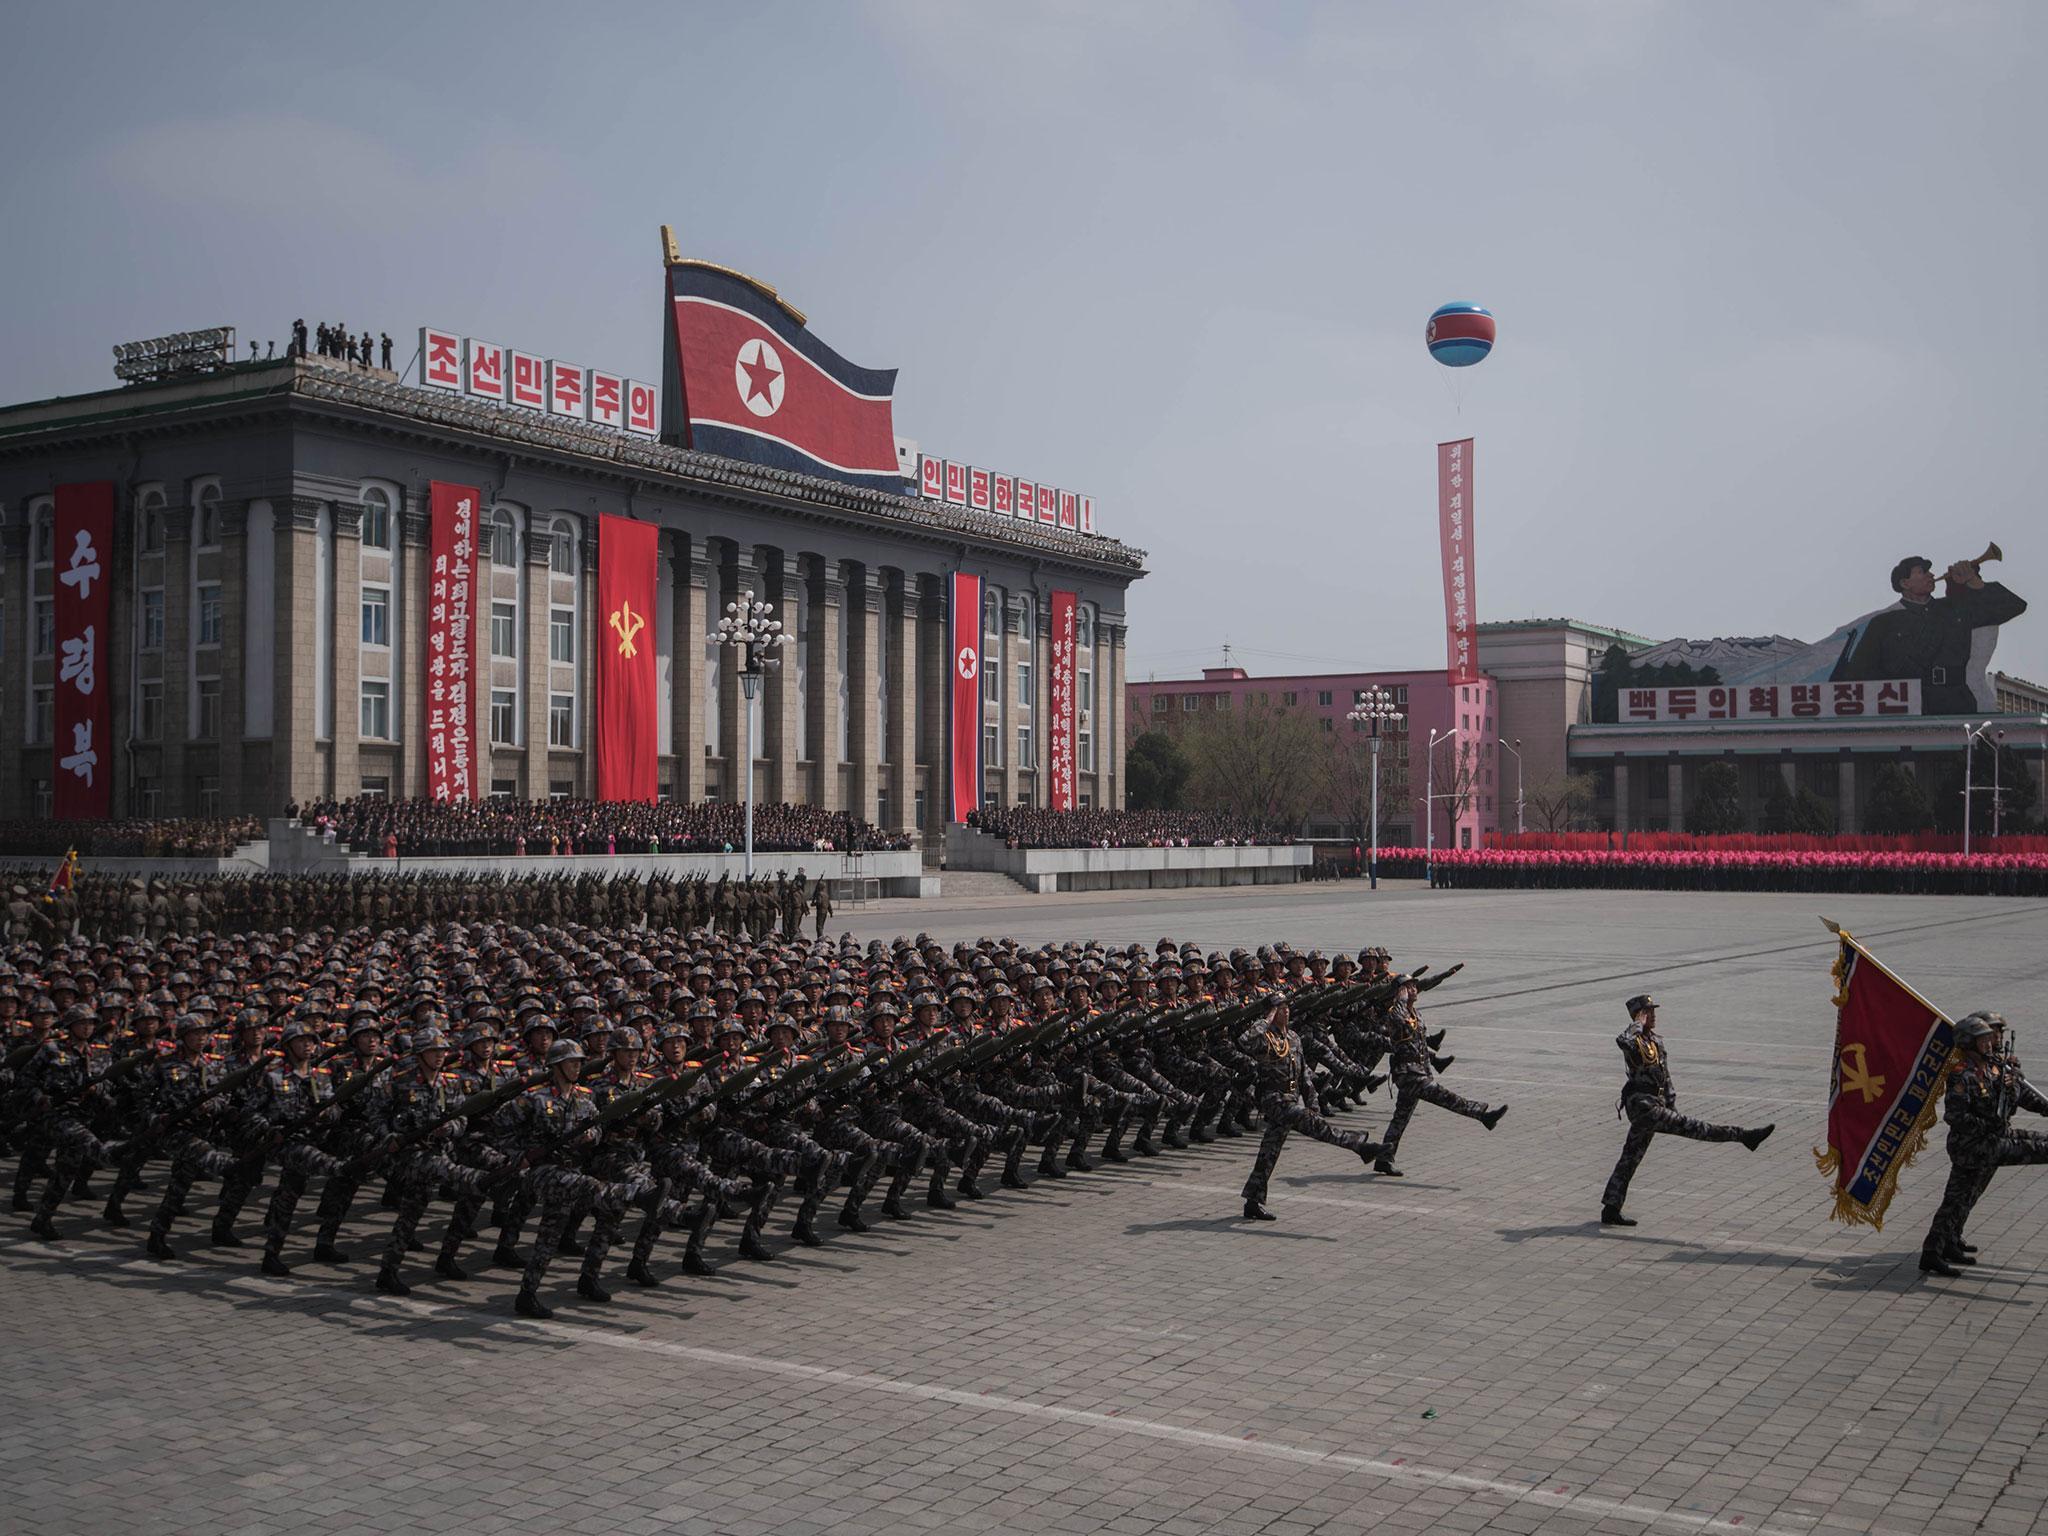 Ostentatious displays of military might are common in authoritarian states such as North Korea